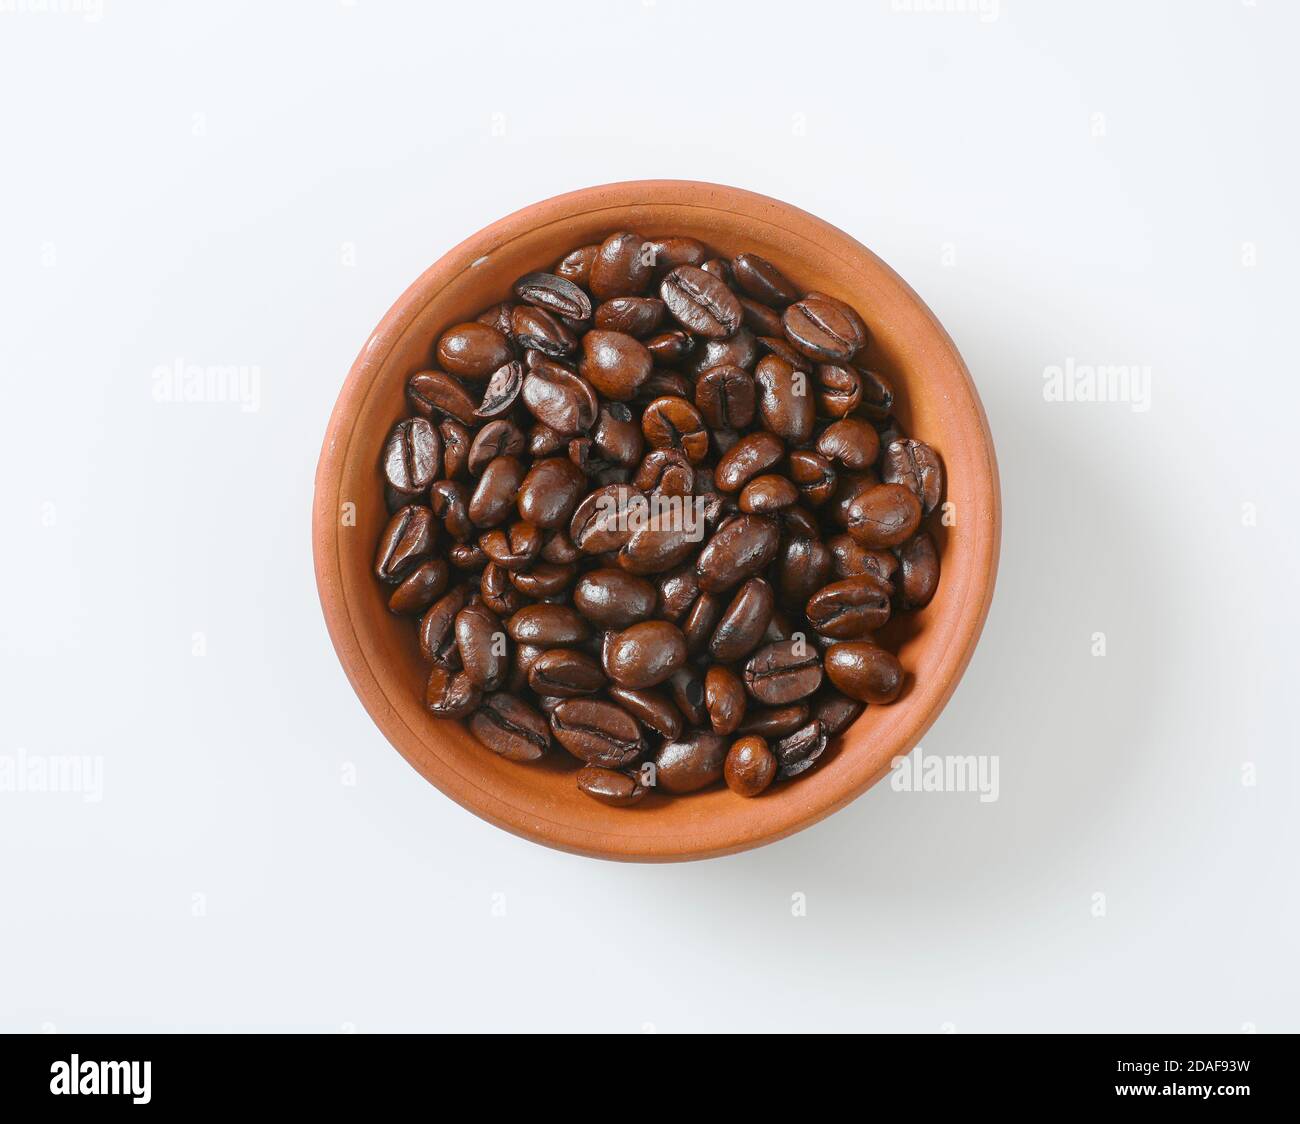 Roasted coffee beans in terracotta bowl Stock Photo